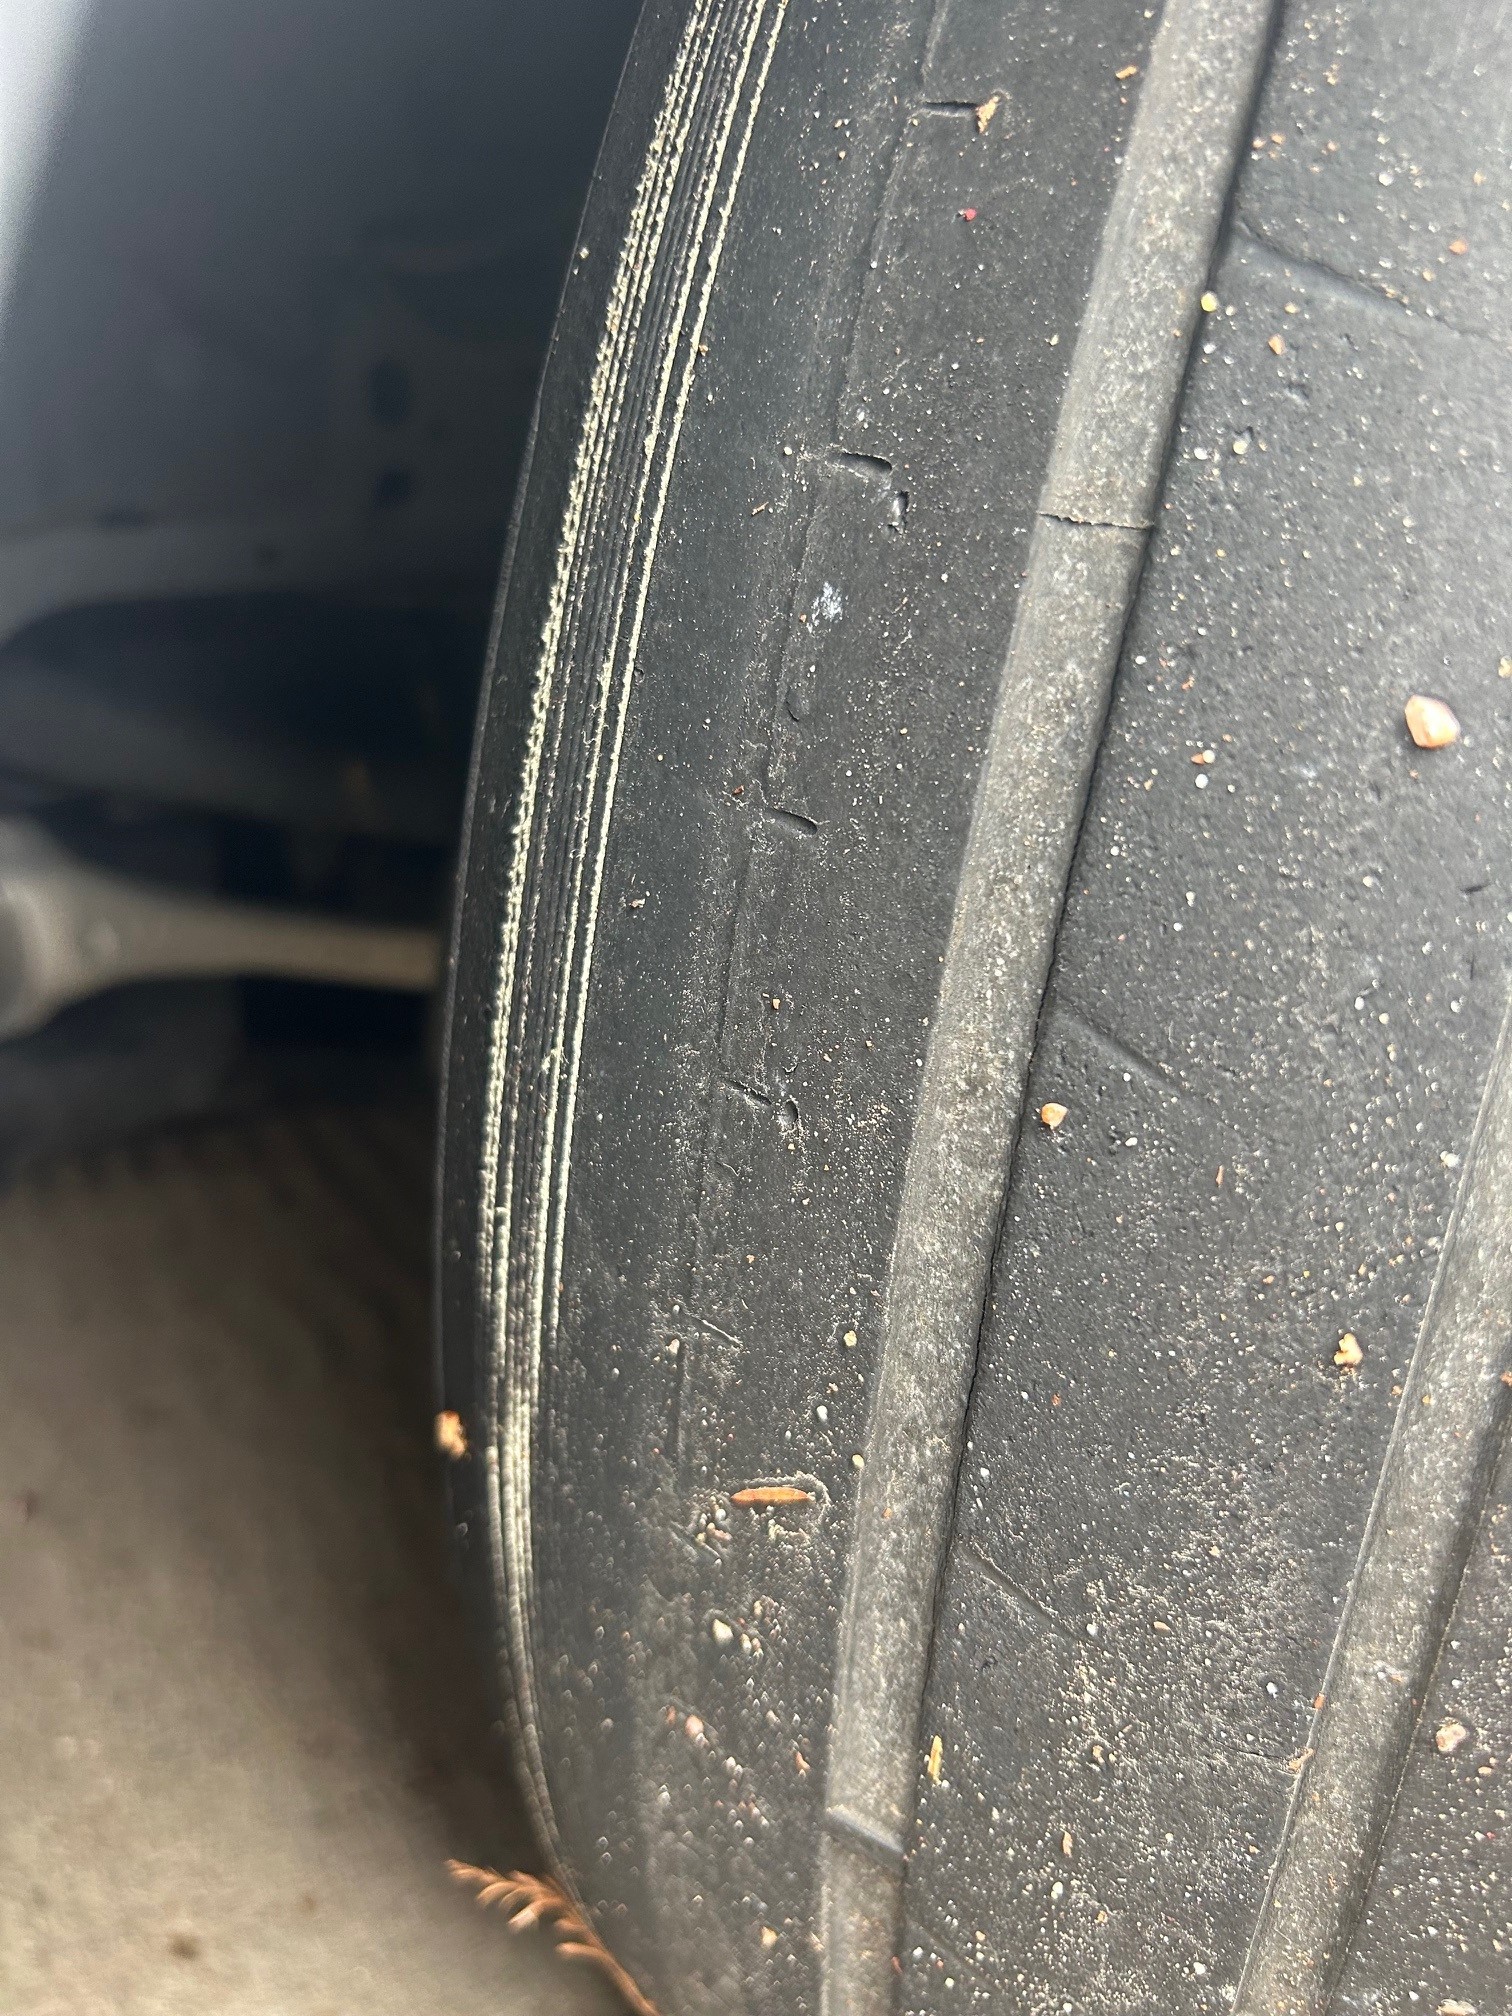 S650 Mustang Got 4,100 miles out of my Trofeo RS tires tire3